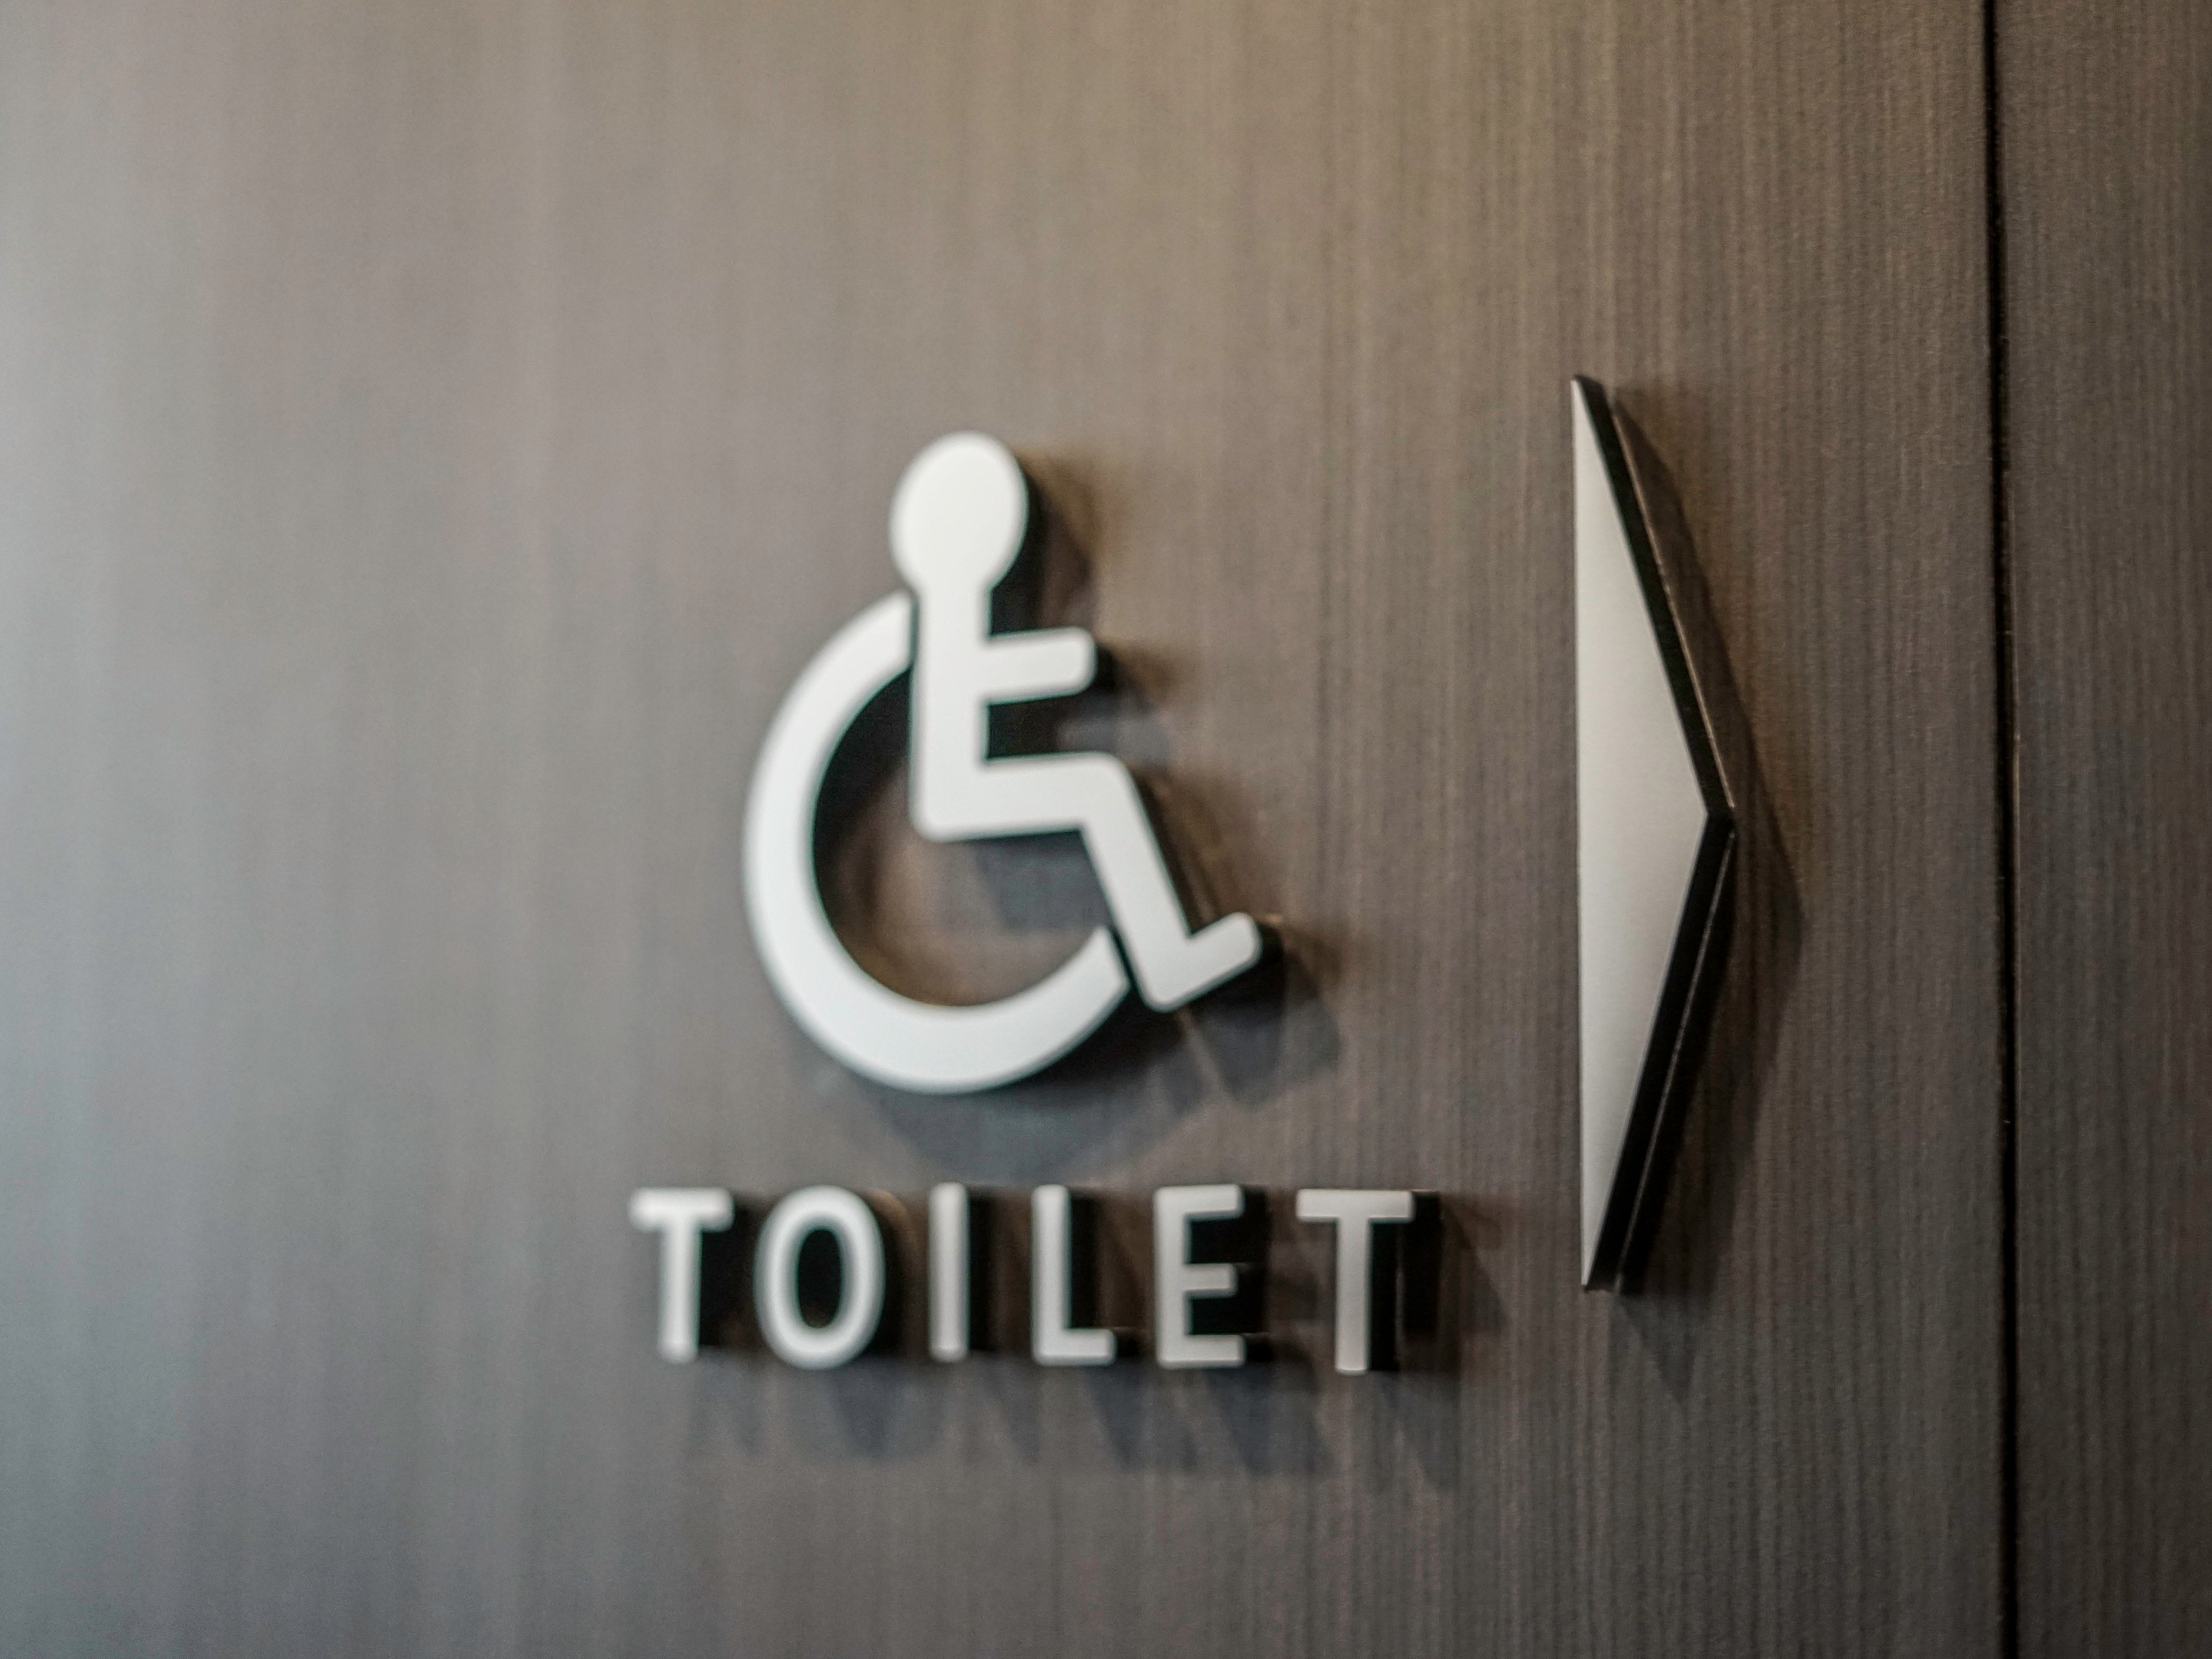 In my experience, access to disabled toilets has worsened since venues have reopened after Covid measures